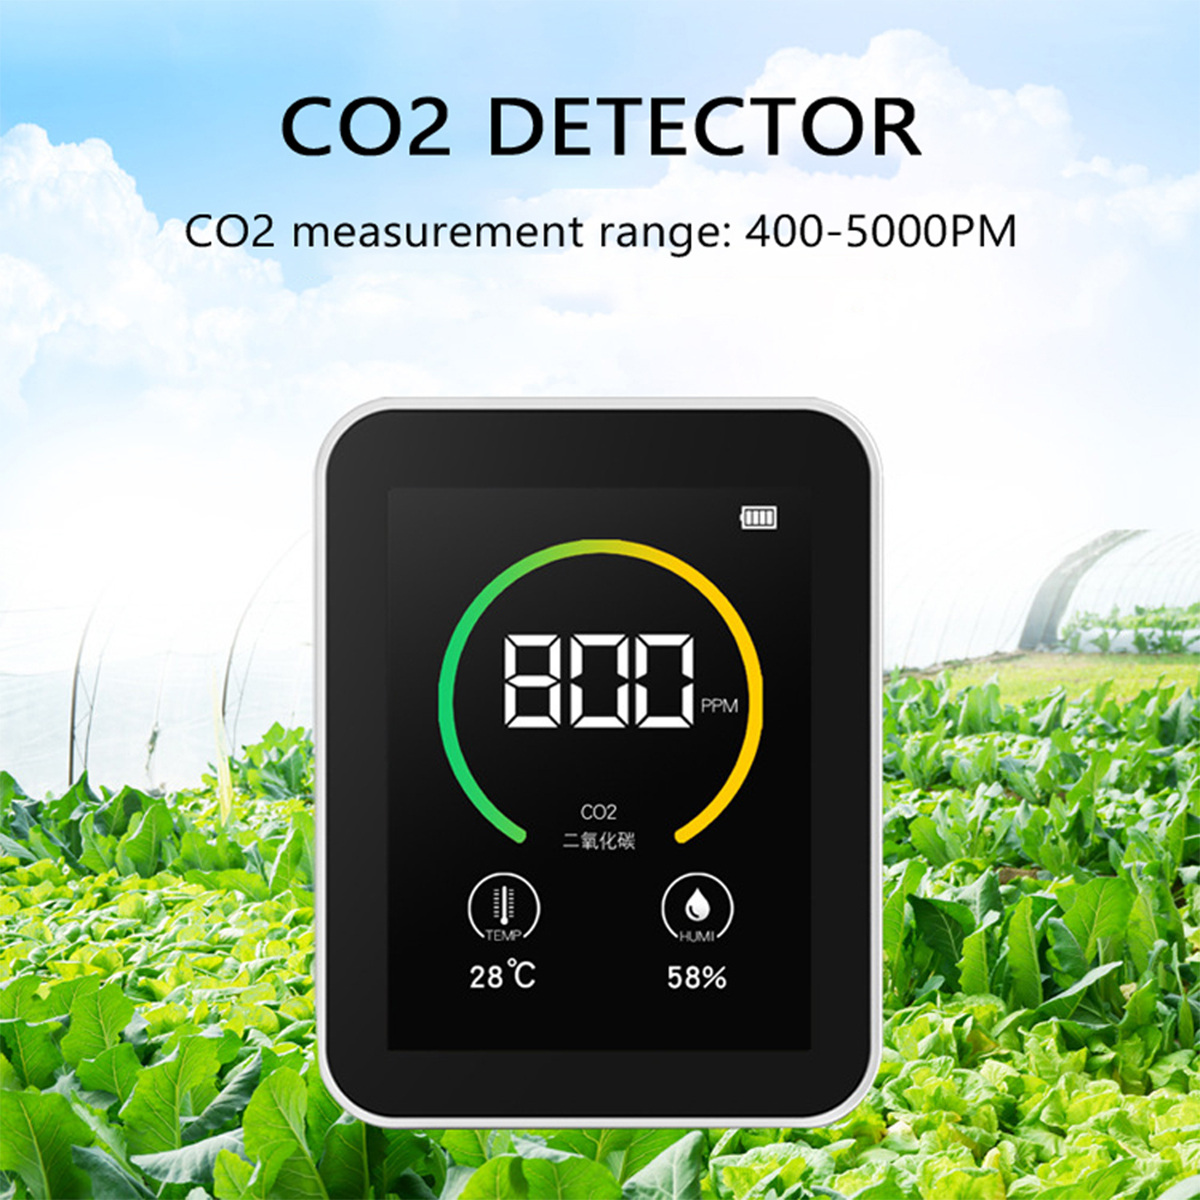 Gas-Co2-Sensor-Detector-Air-Quality-Monitor-Analyzer-W-Temperature-Humidity-Display-1822374-3